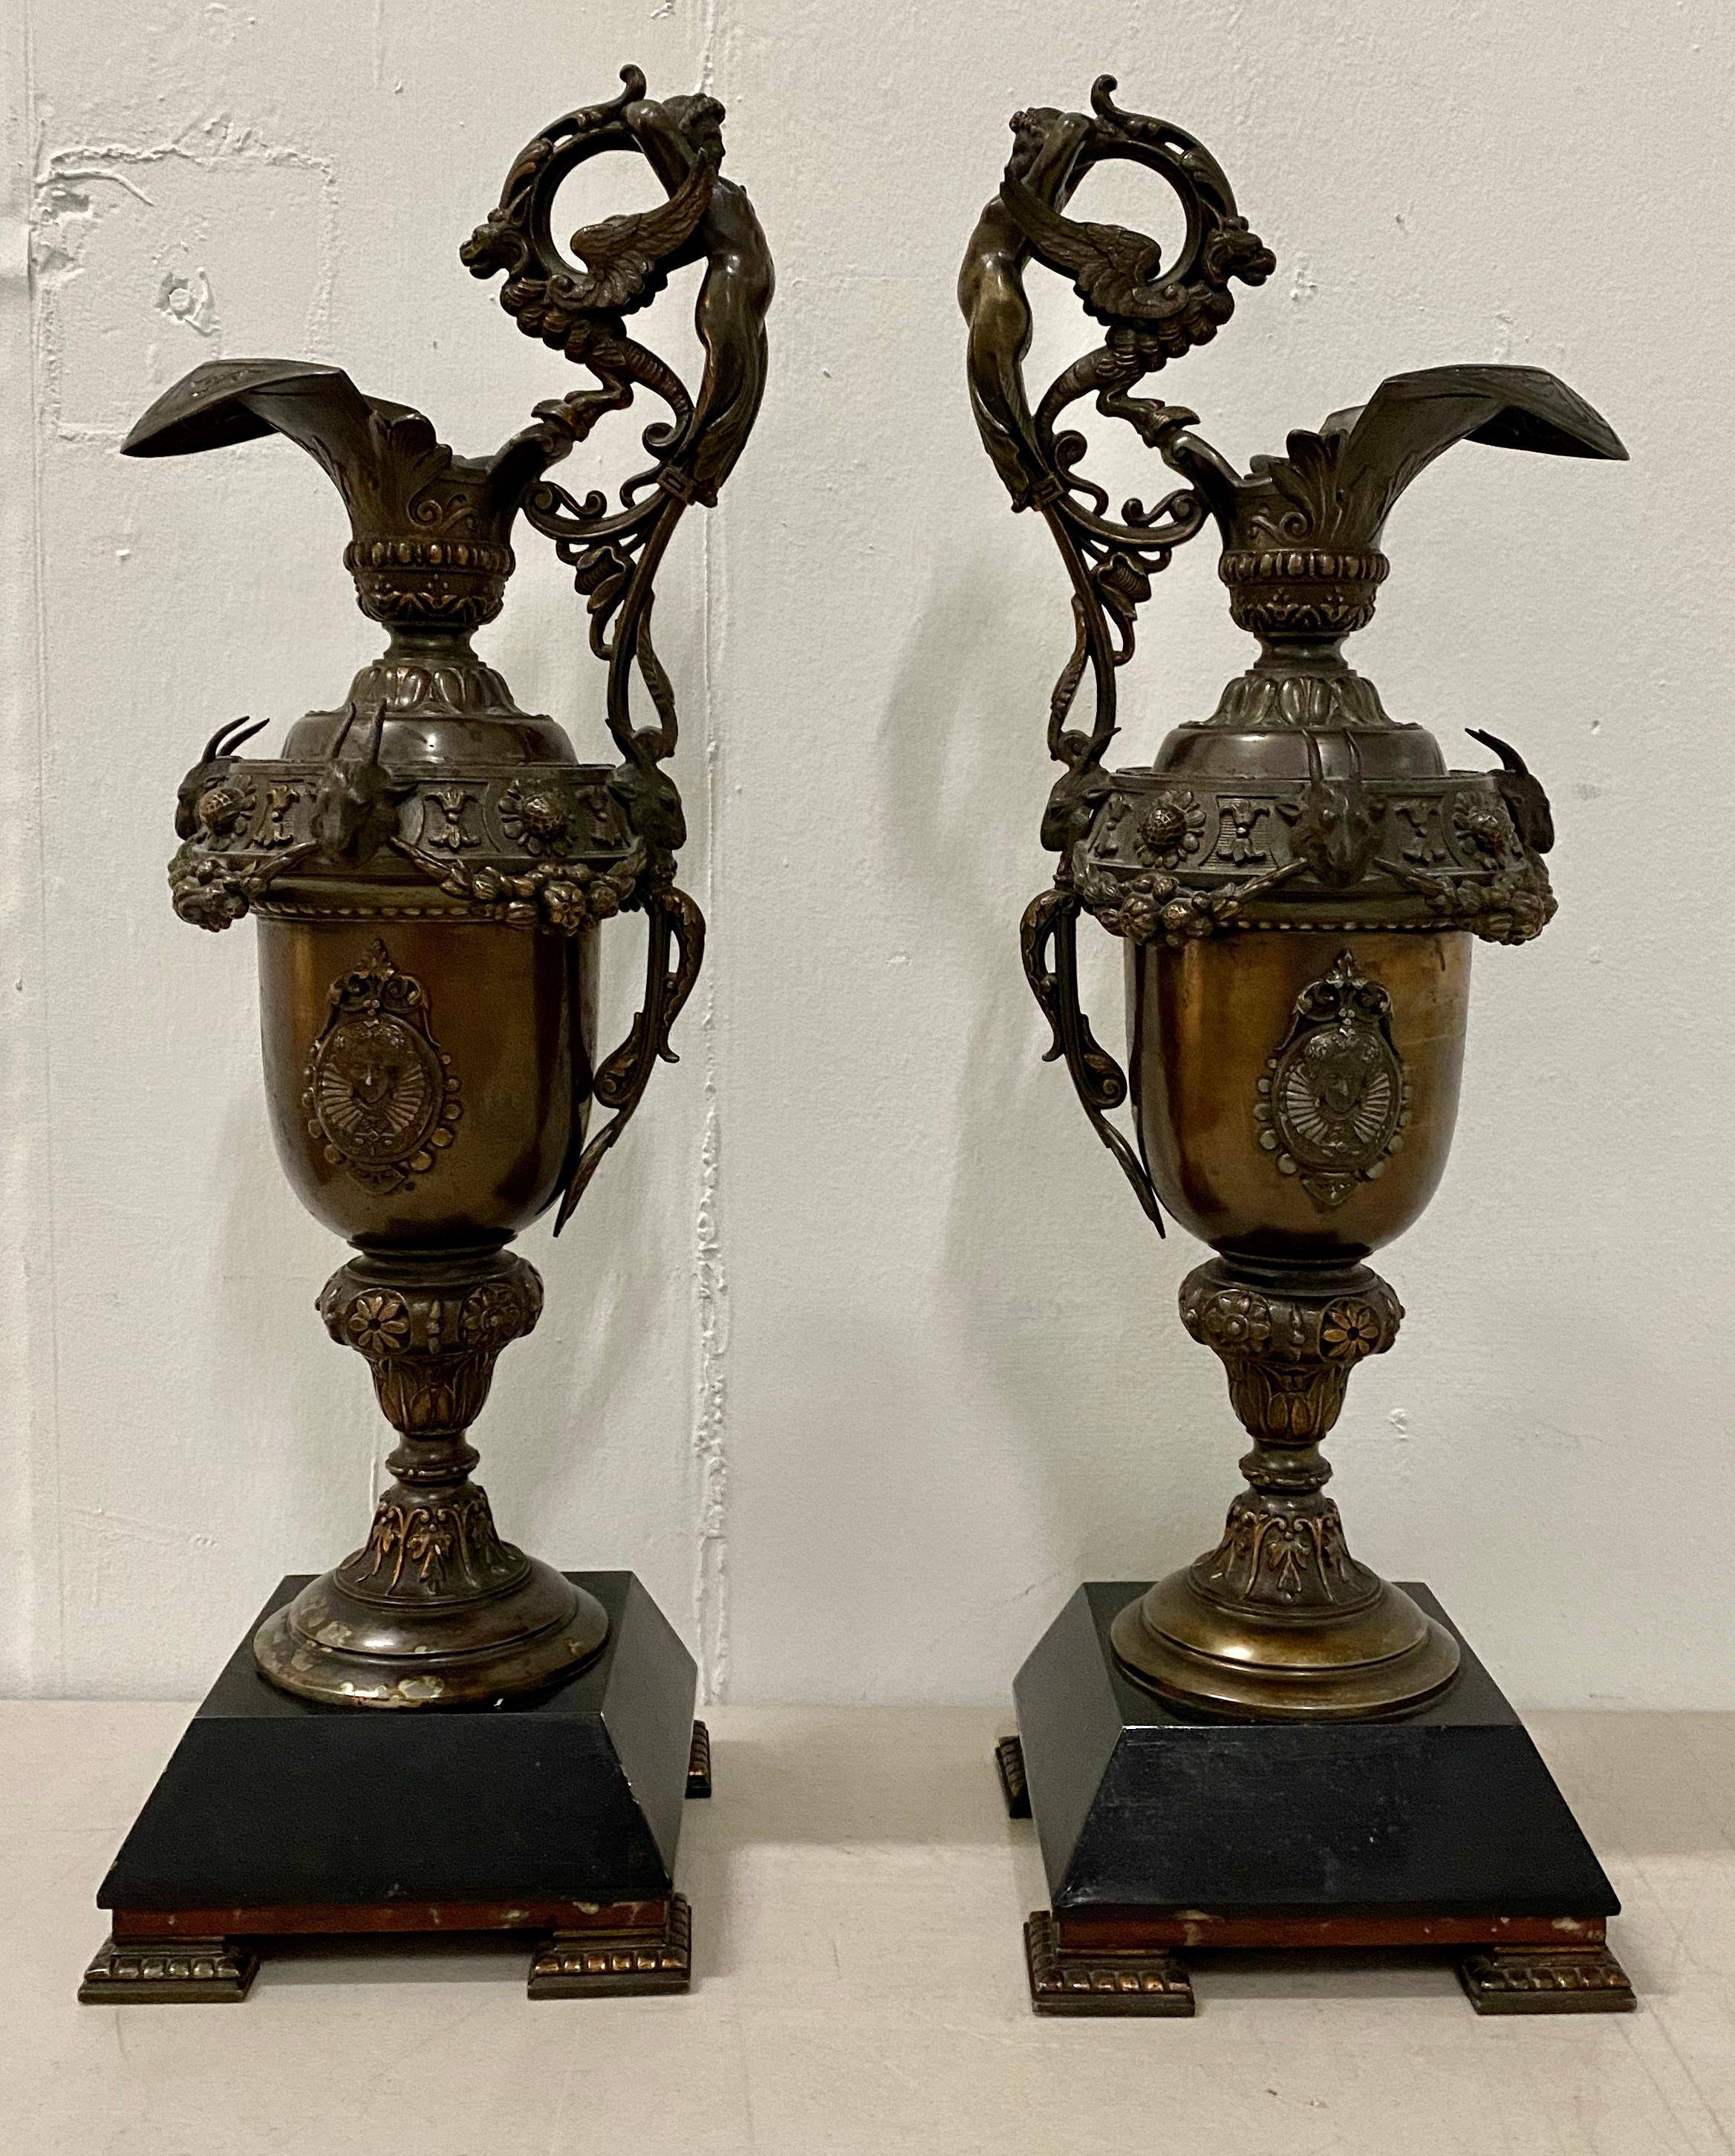 Pair of 19th century copper plate spelter ewers

Dimensions 6.25